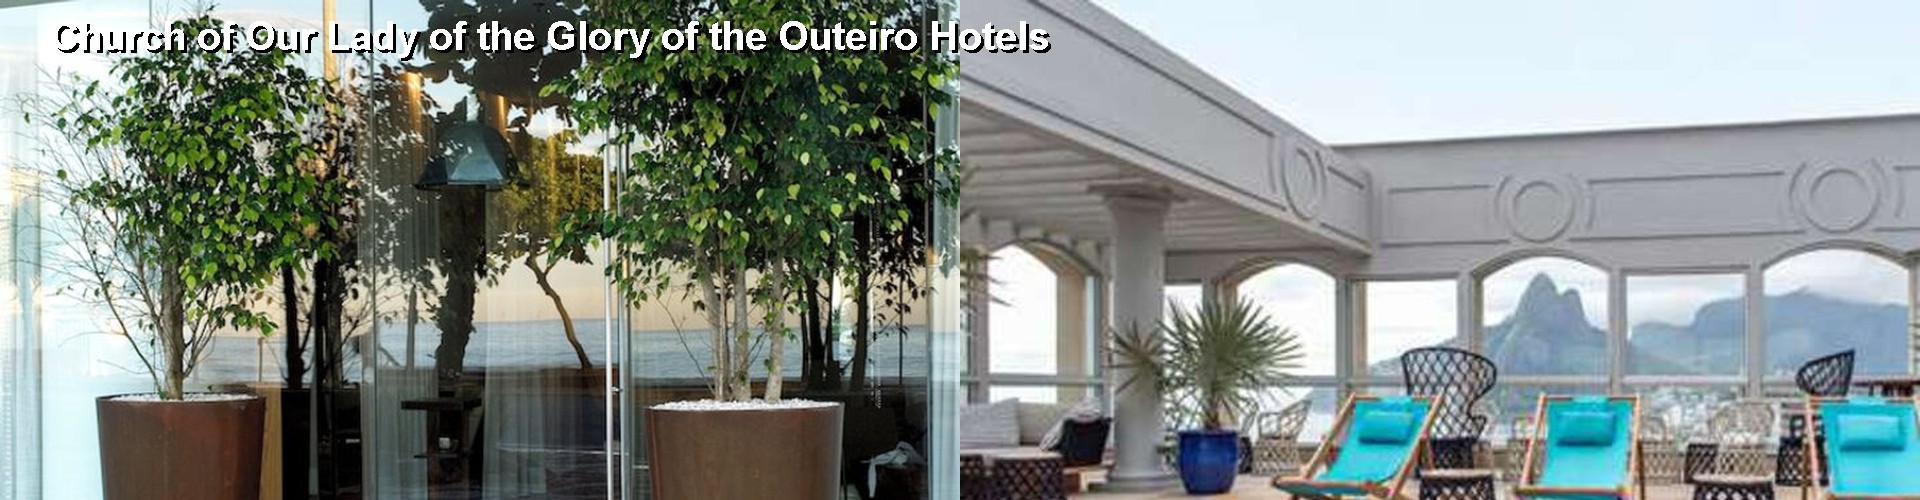 5 Best Hotels near Church of Our Lady of the Glory of the Outeiro